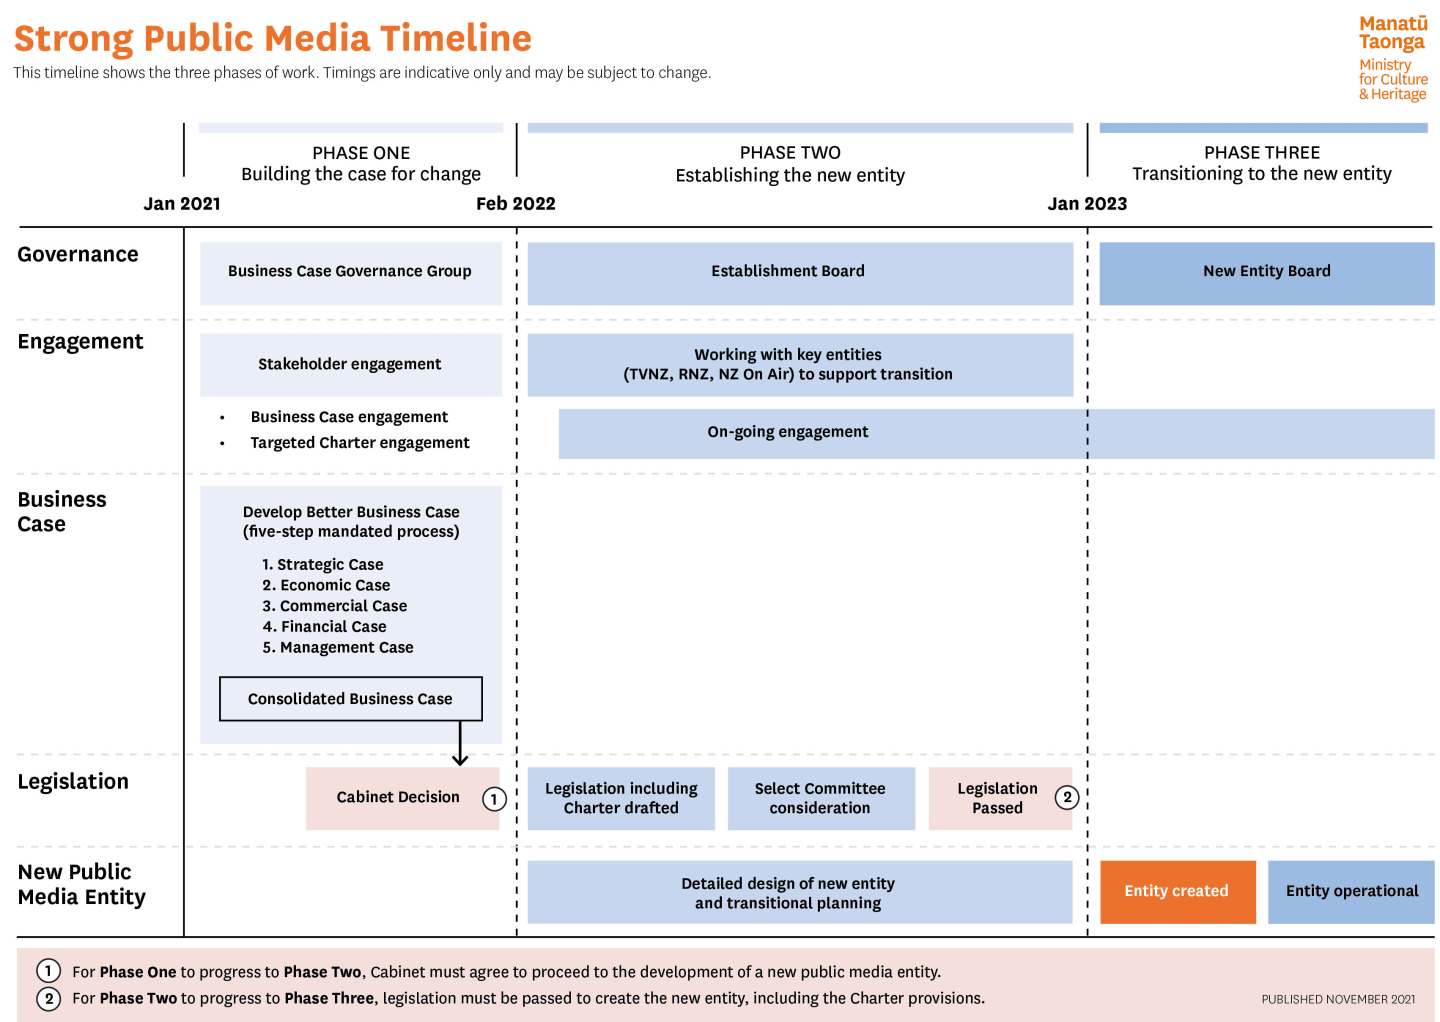 A timeline showing the expected establishment process for a new public media entity.